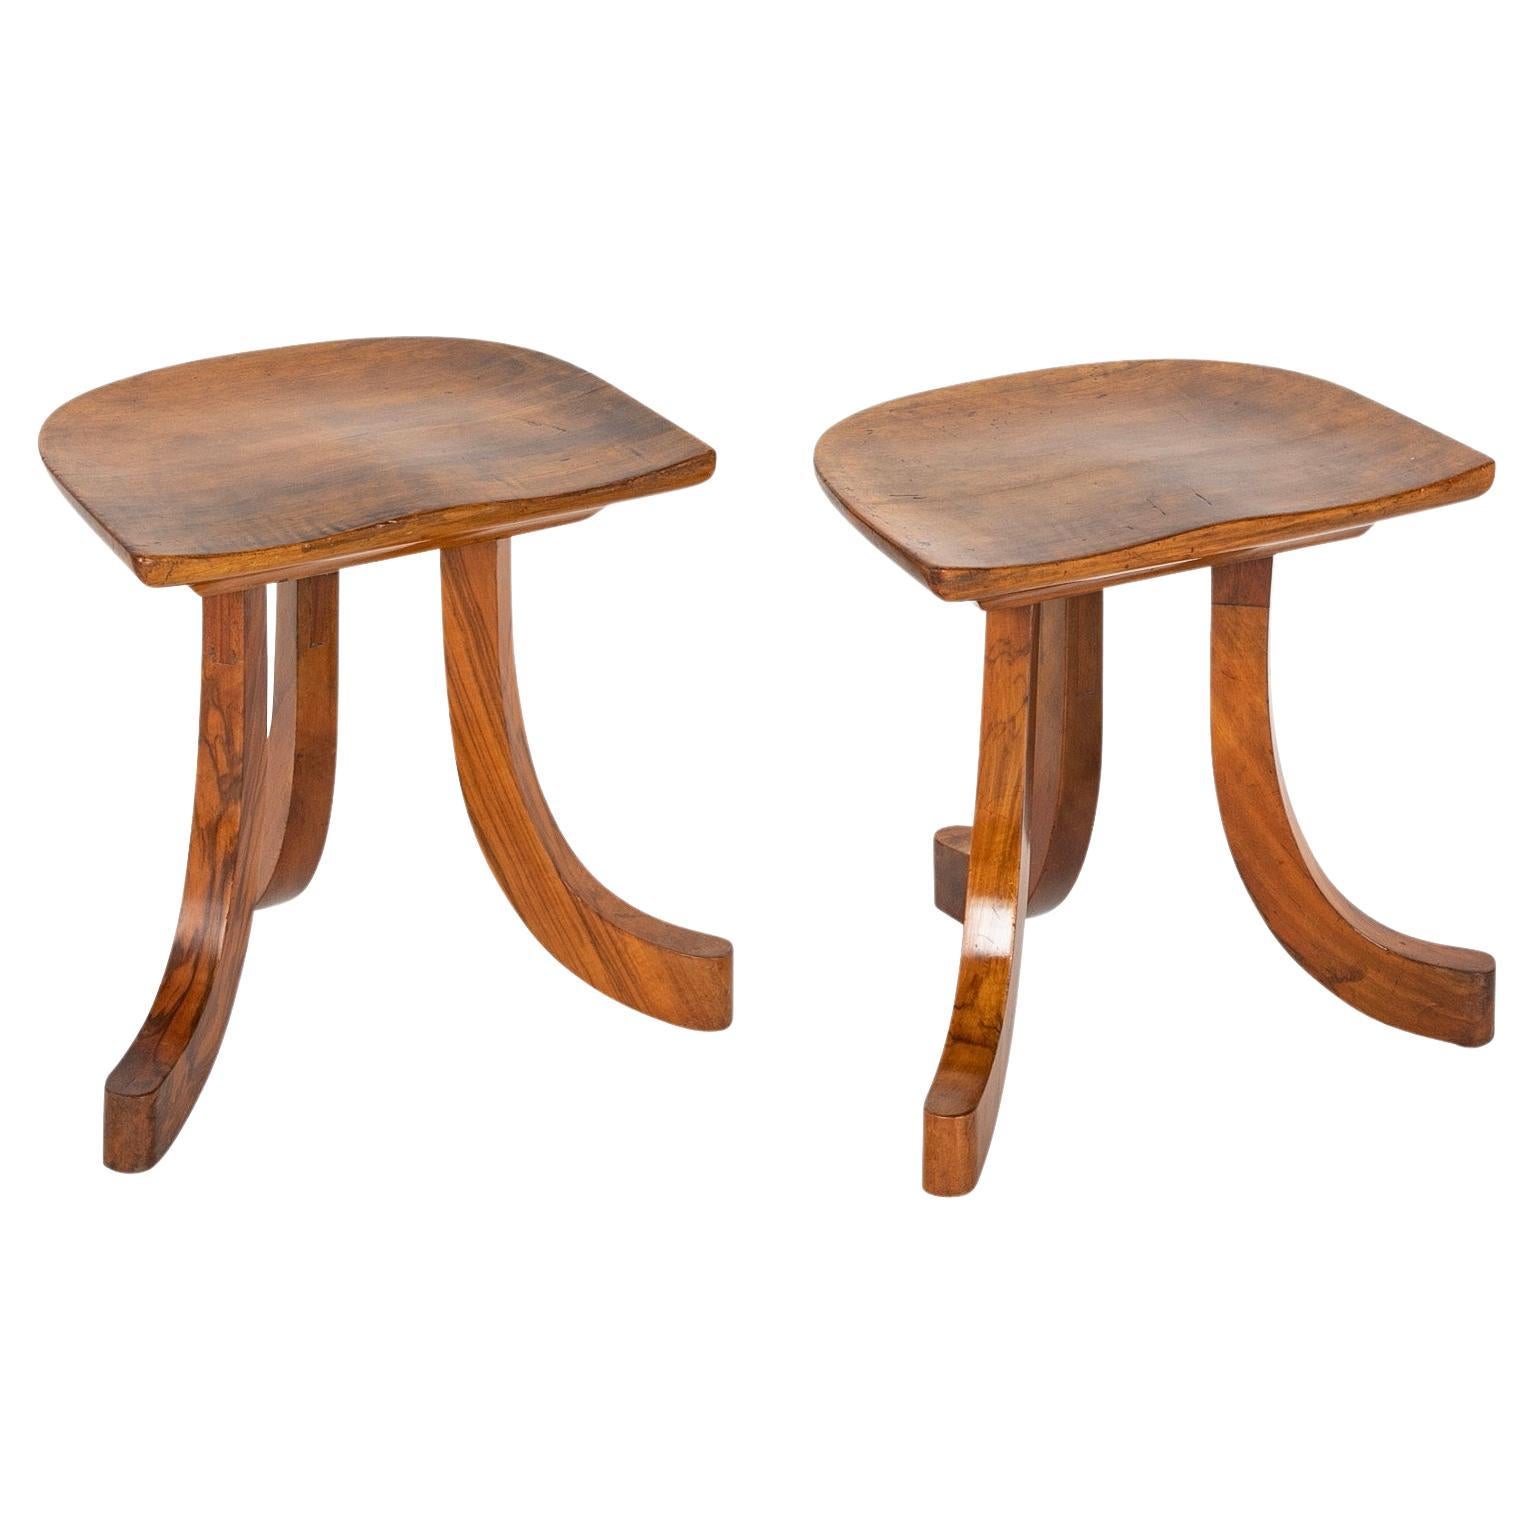 Pair of Walnut Tripod Thebes Stools in the Manner of Liberty & Co. For Sale